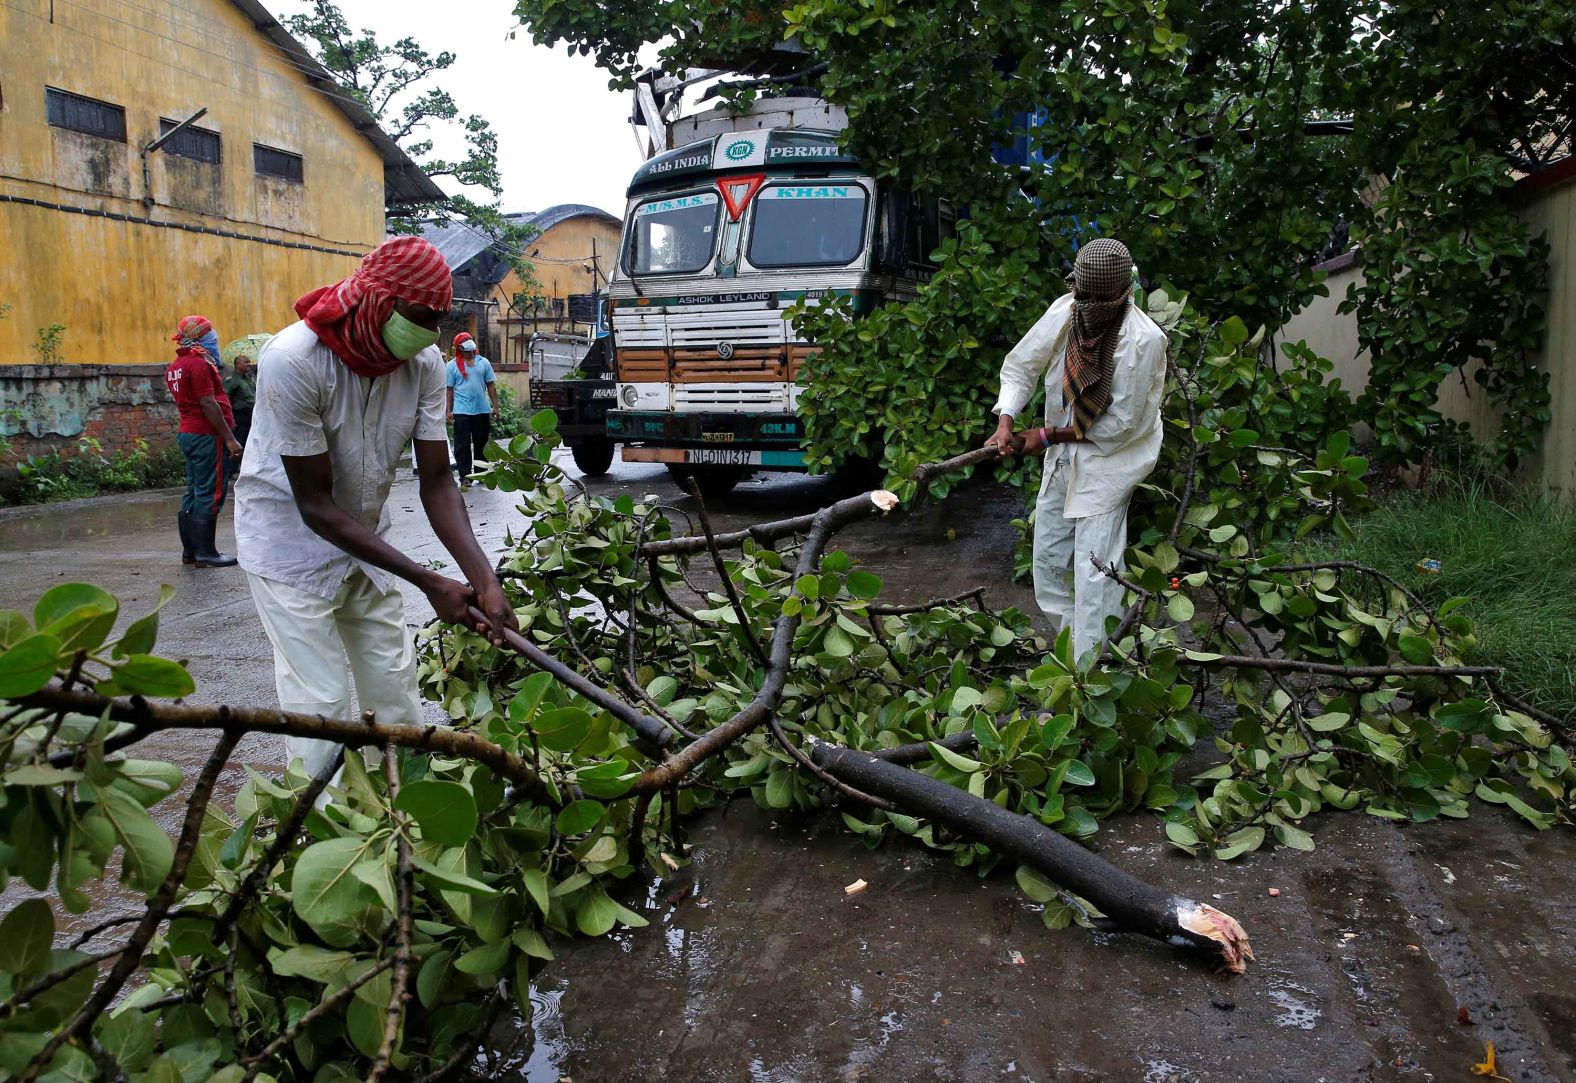 Rescue workers in Kolkata cut tree branches that fell on a truck due to heavy winds.